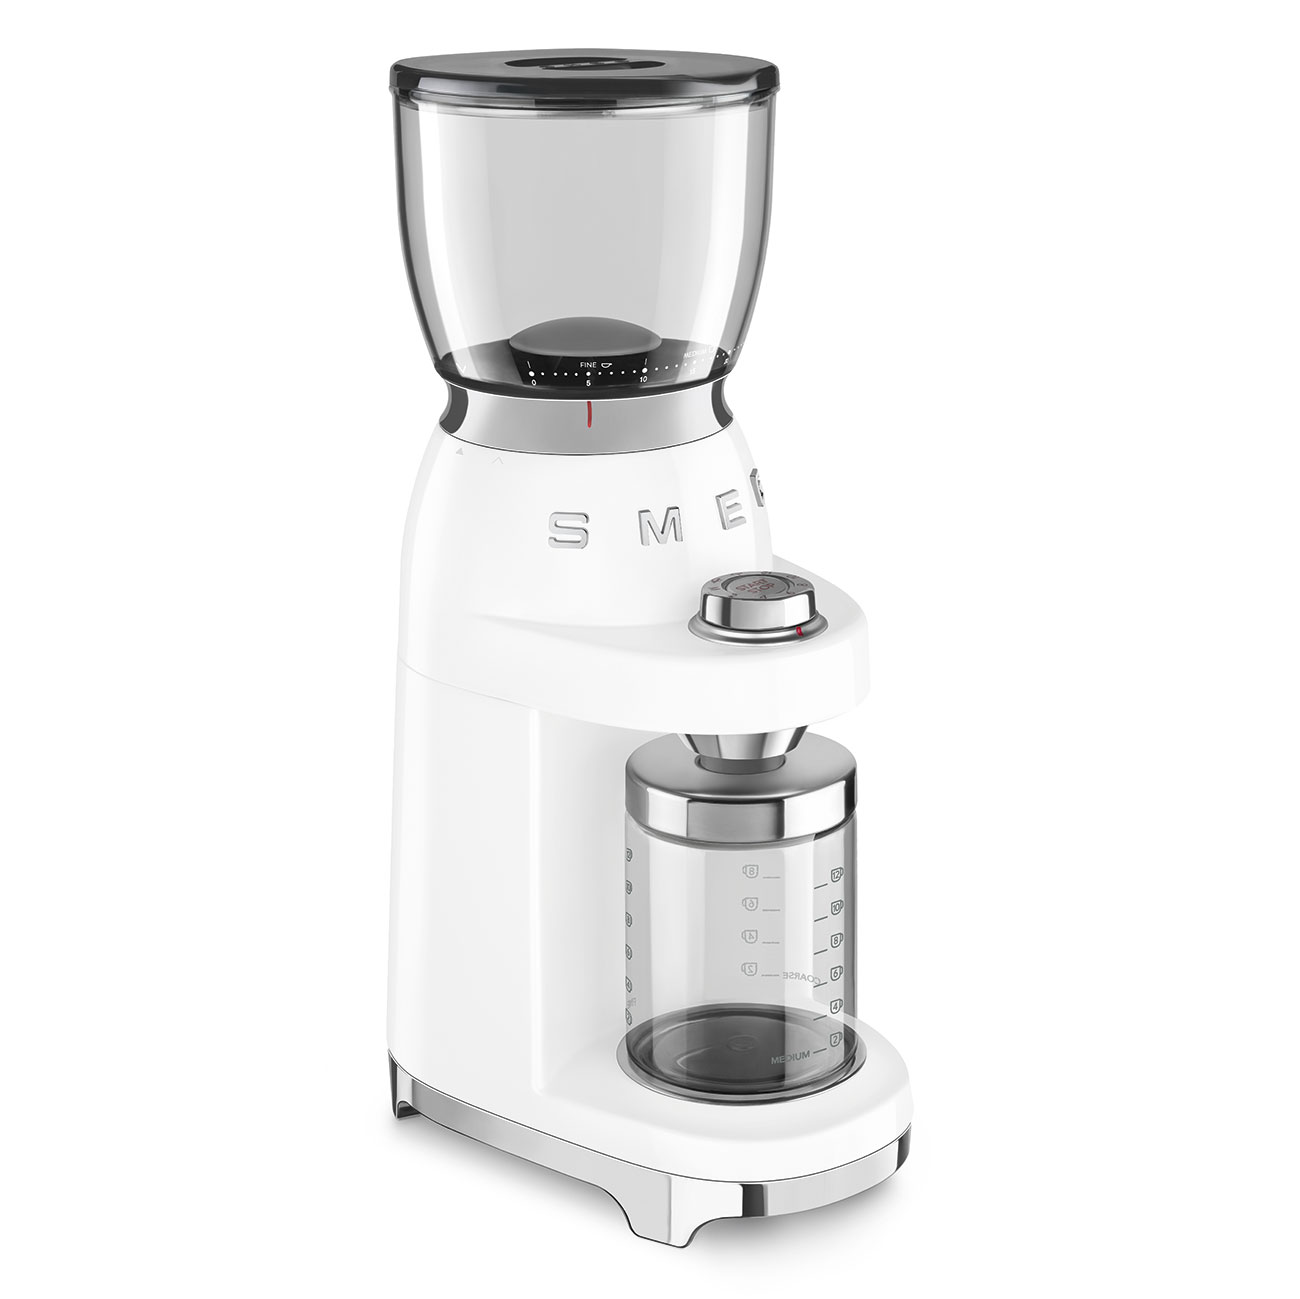 White Coffee Grinder featuring a conical burr - CGF01WHUK - Smeg_4